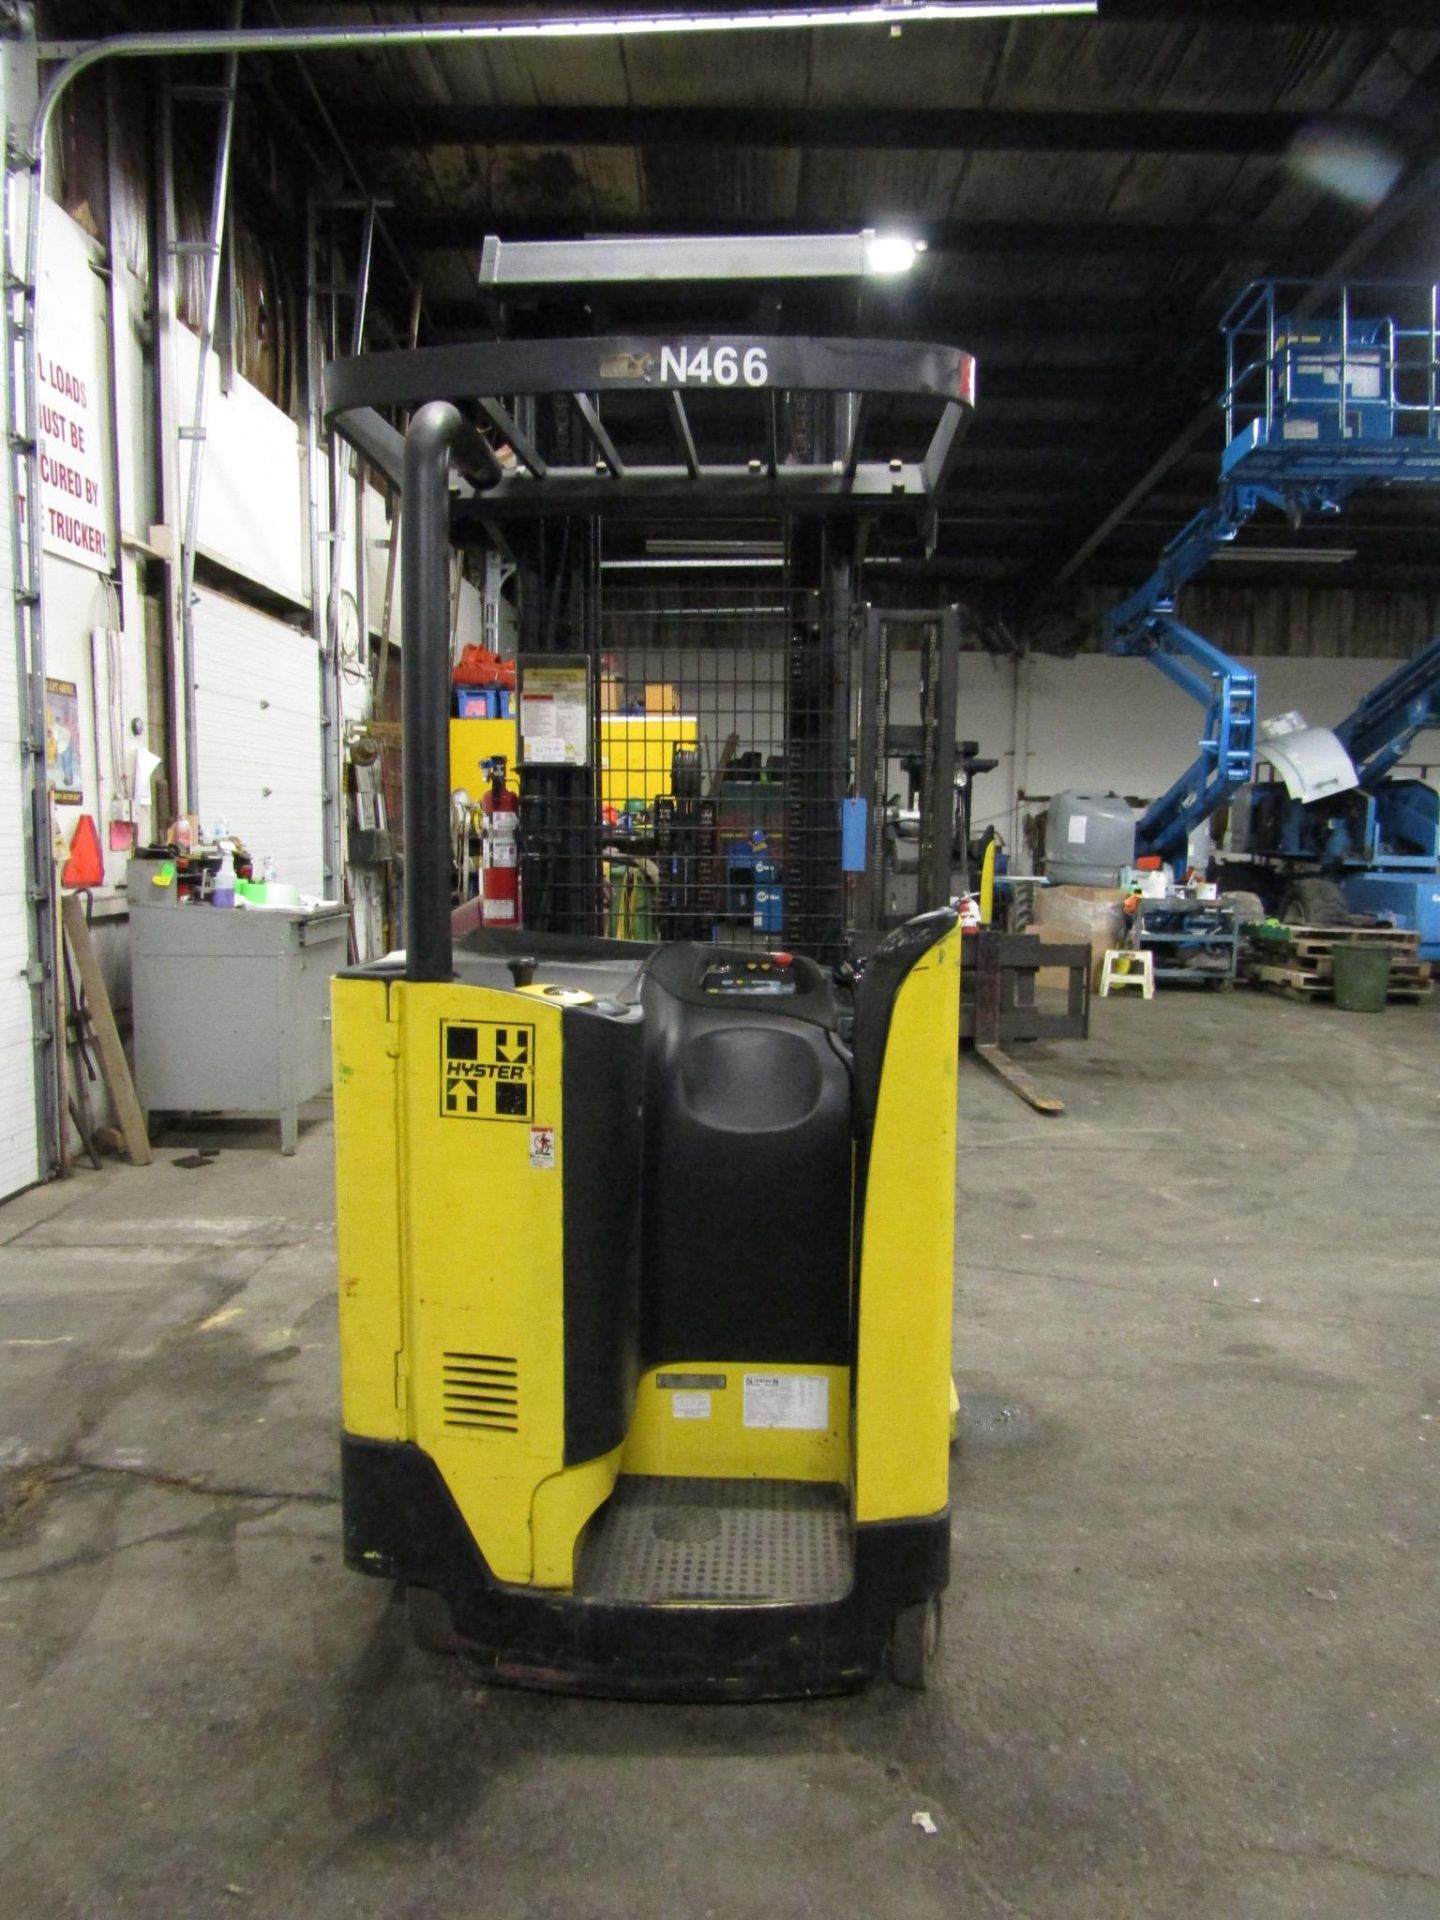 2007 Hyster Reach Truck Pallet Lifter 3000lbs capacity unit ELECTRIC with sideshift and 3-stage - Image 3 of 3